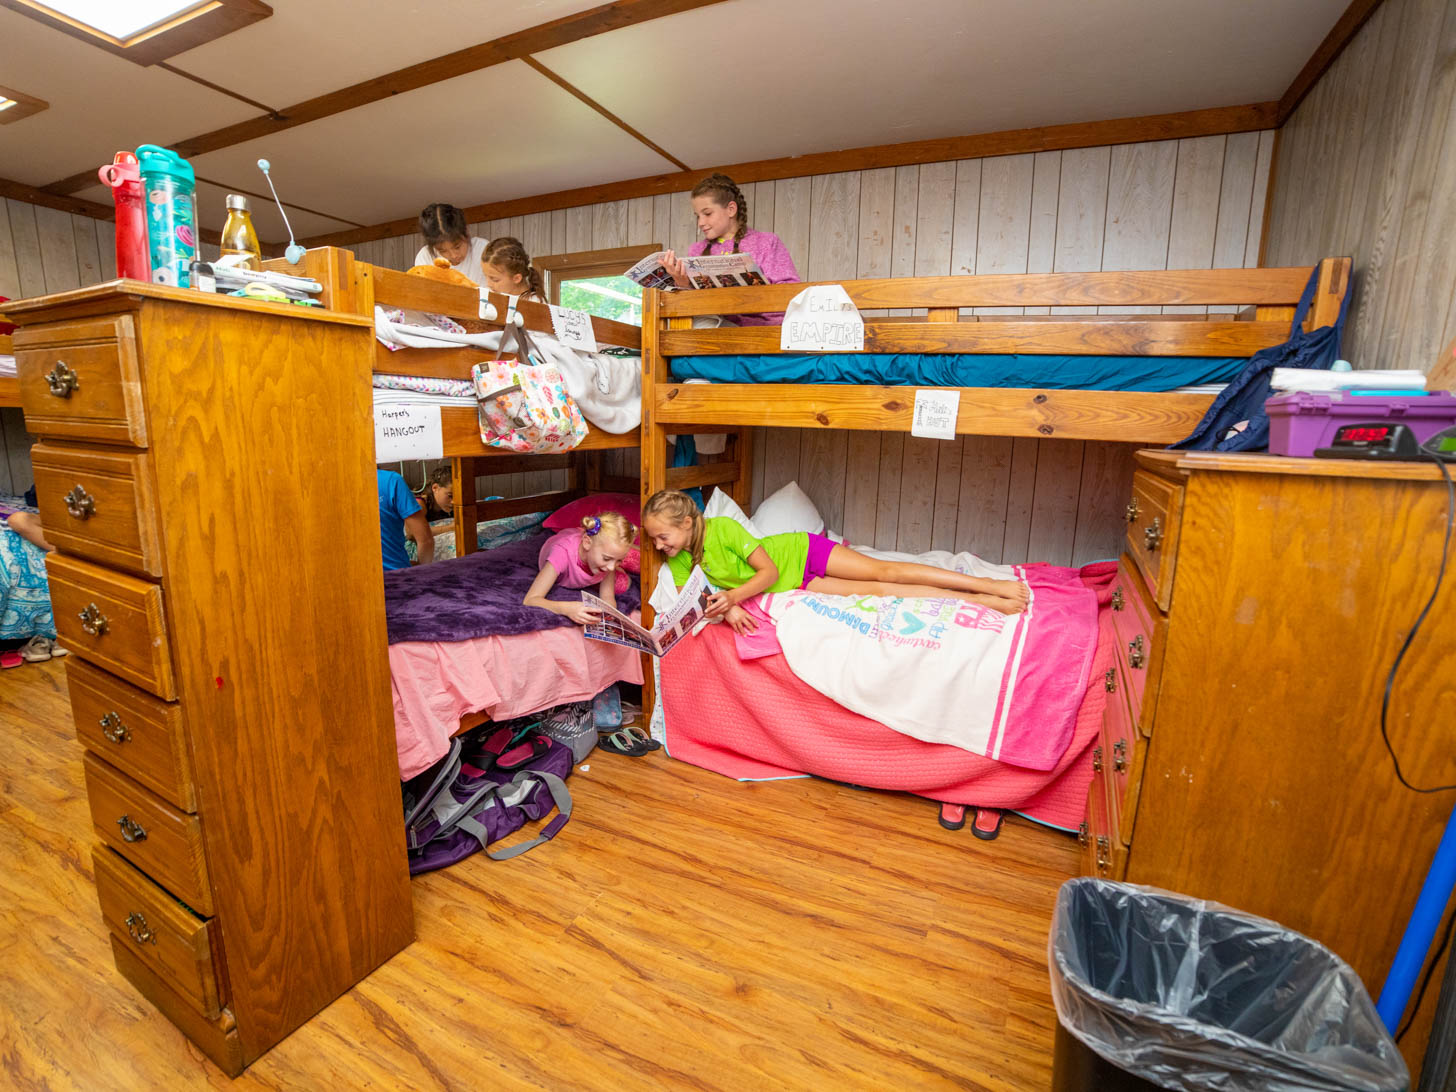 interior of one of the cabins with campers in their bunk beds